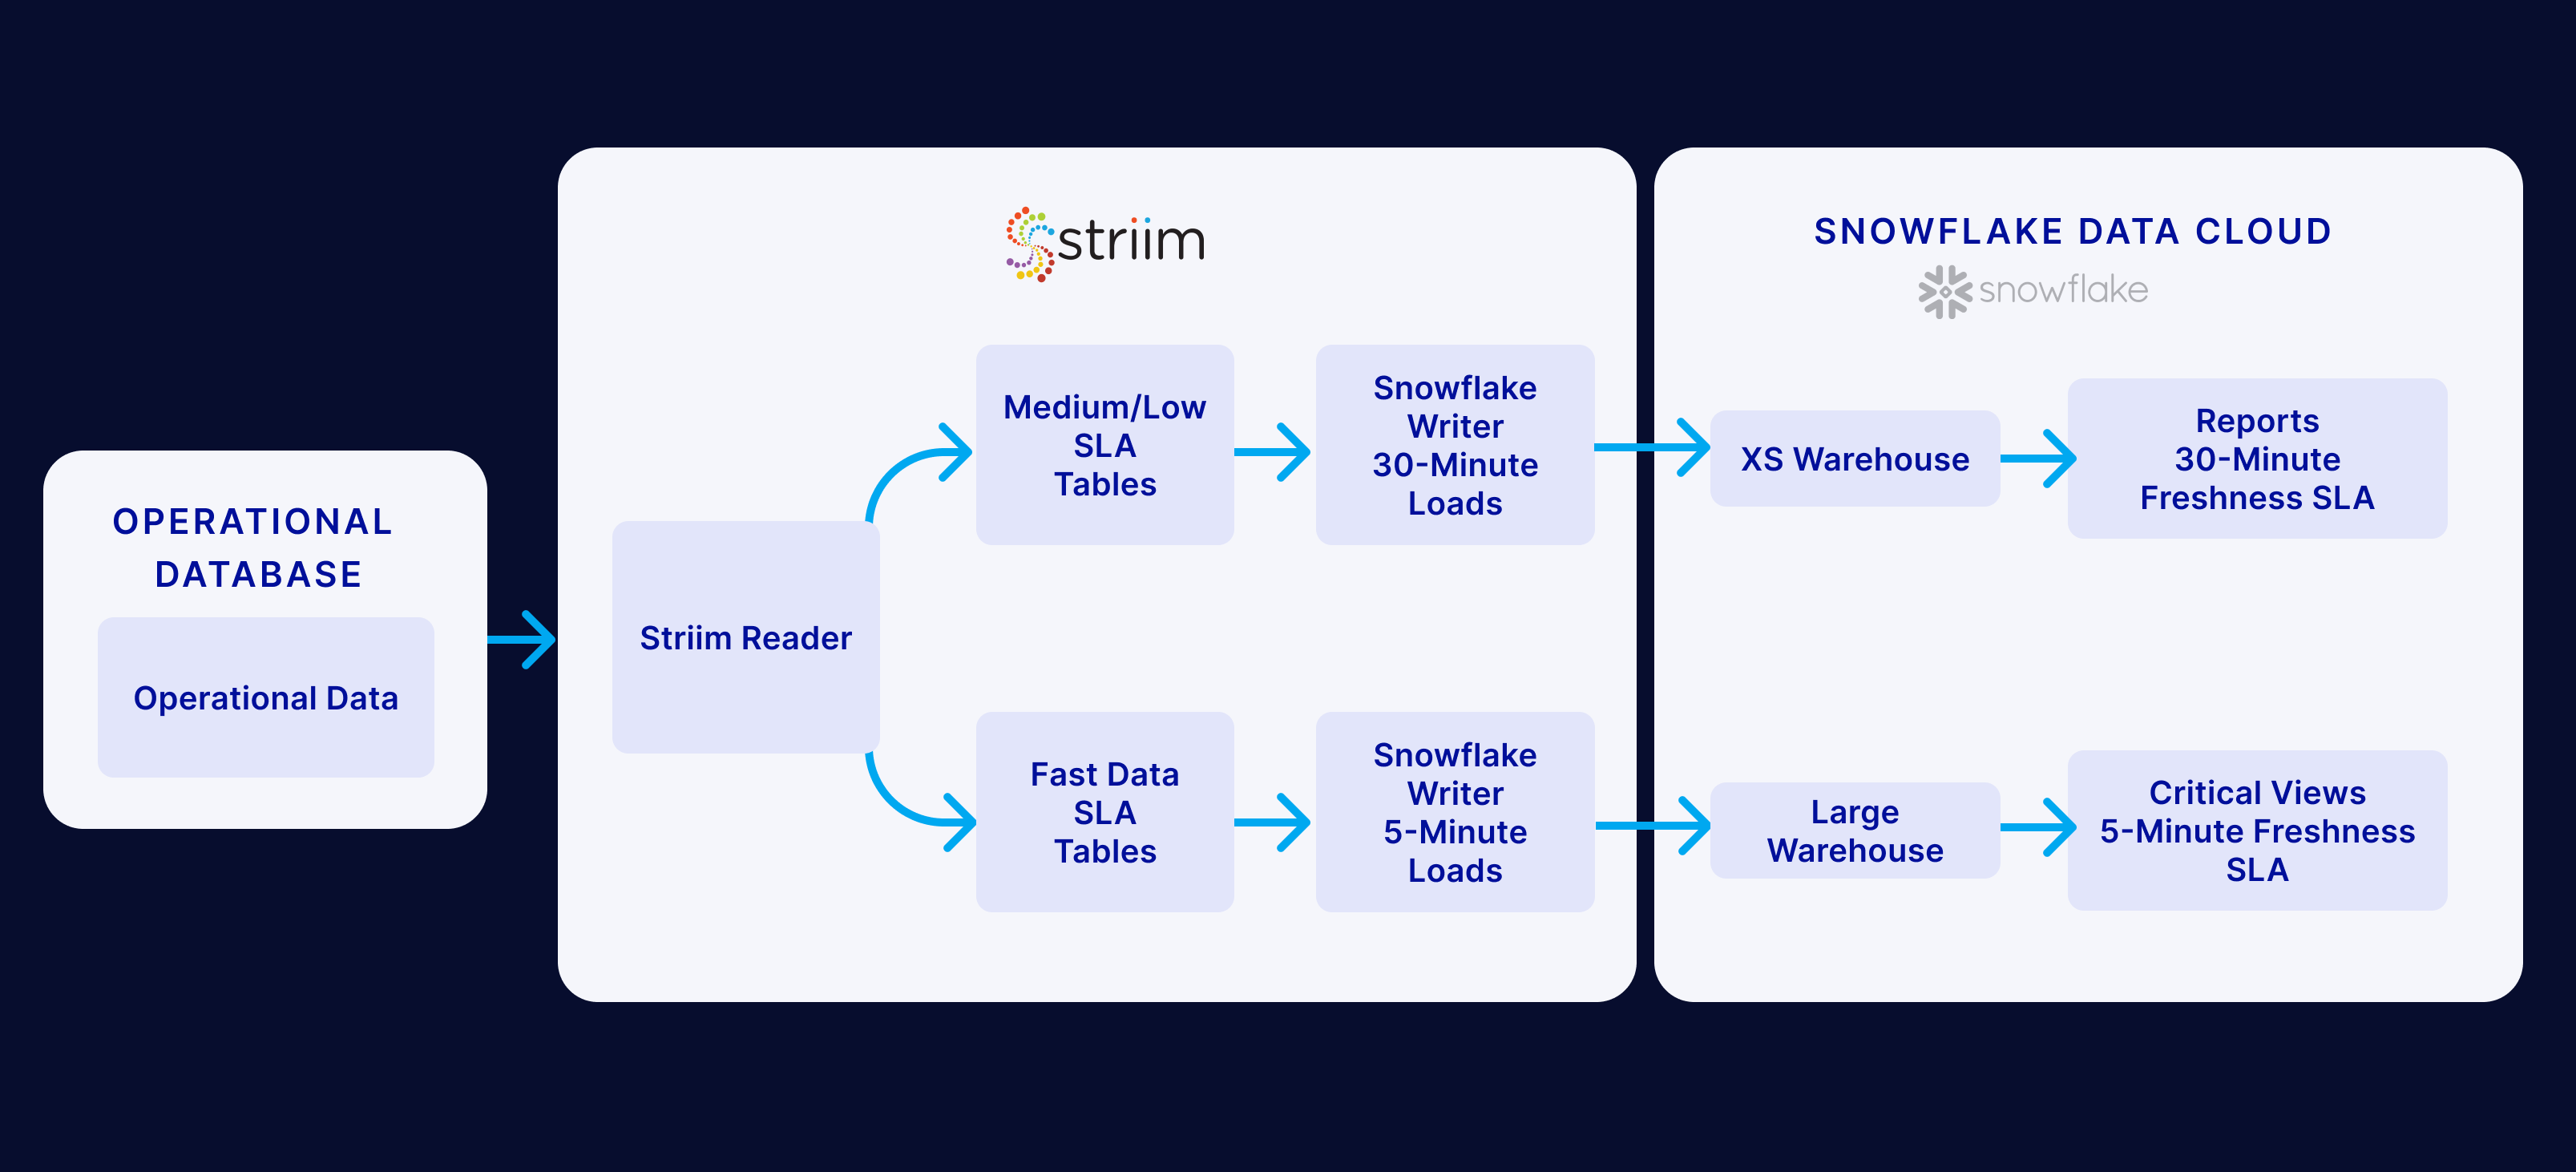 How to upload data into Snowflake with Striim